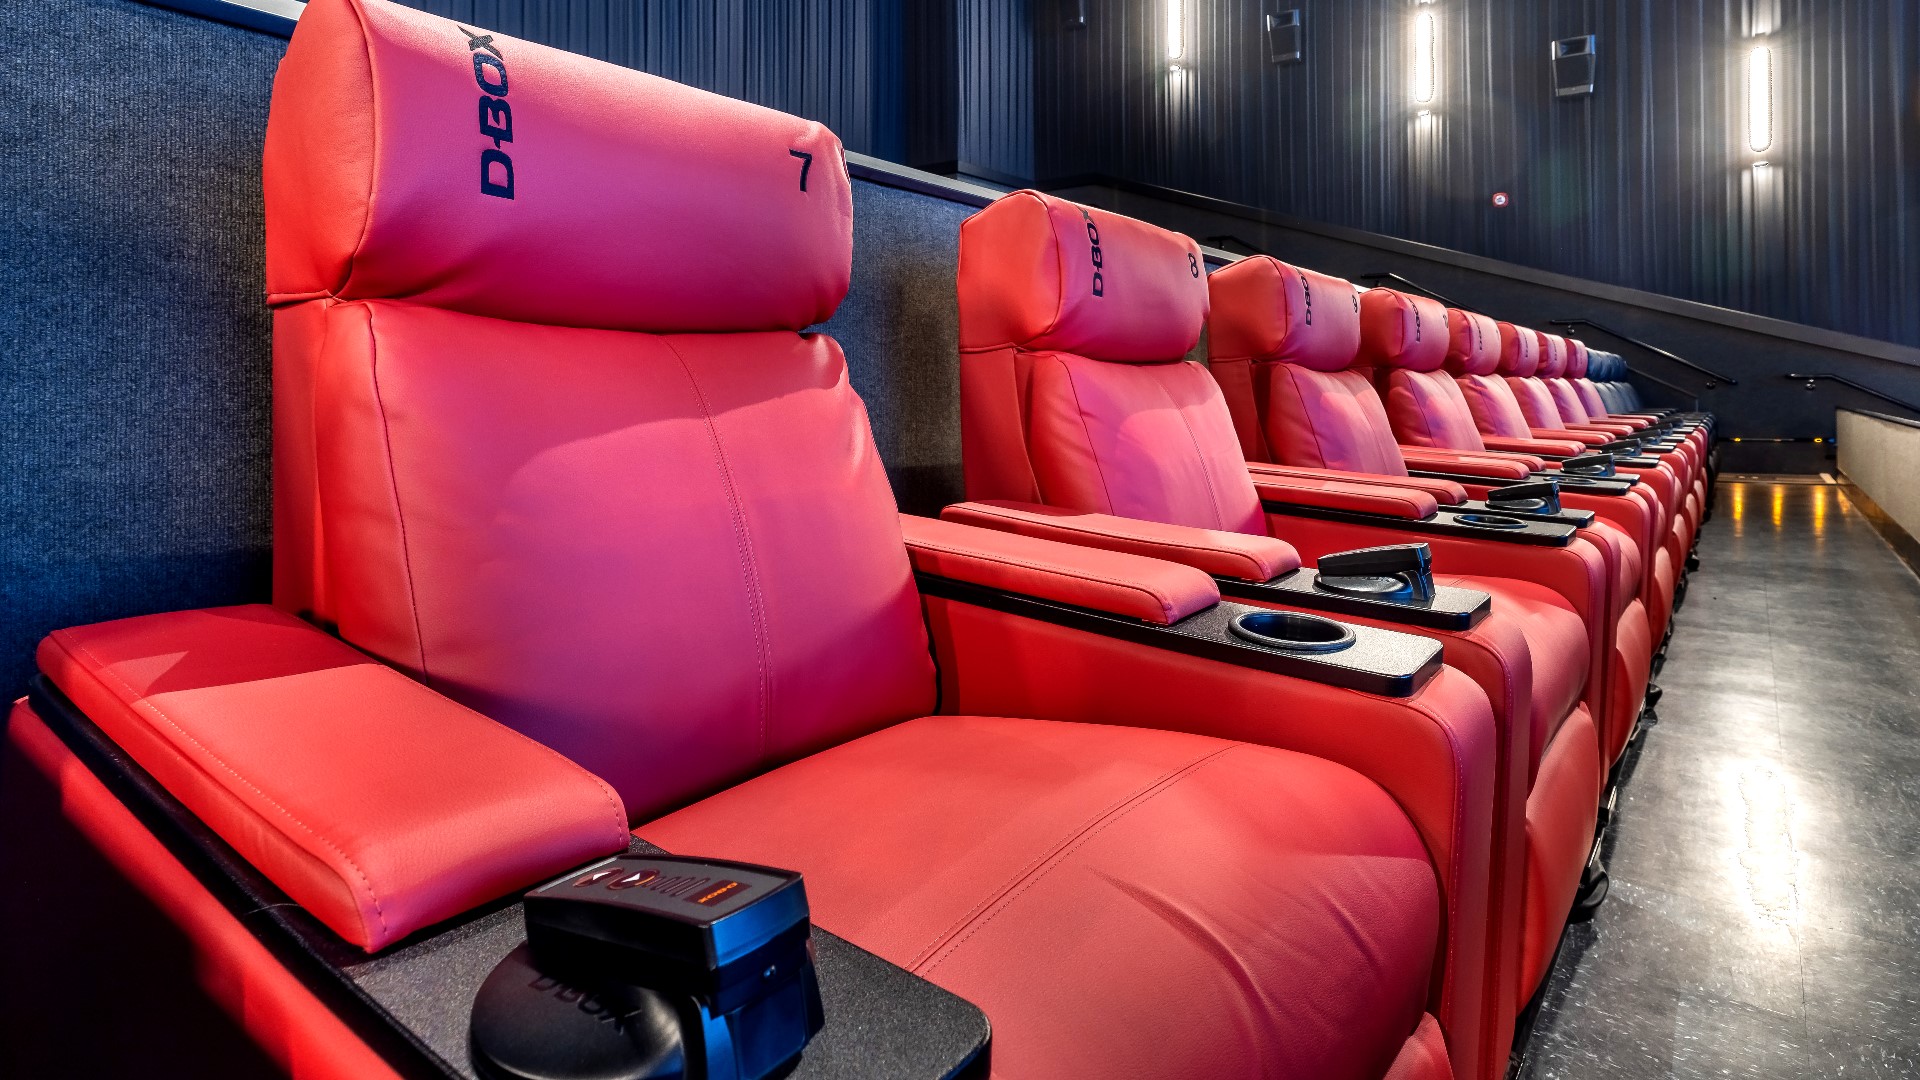 Cinemark Tinseltown in North Canton is the first Cinemark movie theater in Northeast Ohio to unleash motion seats known as D-BOX.